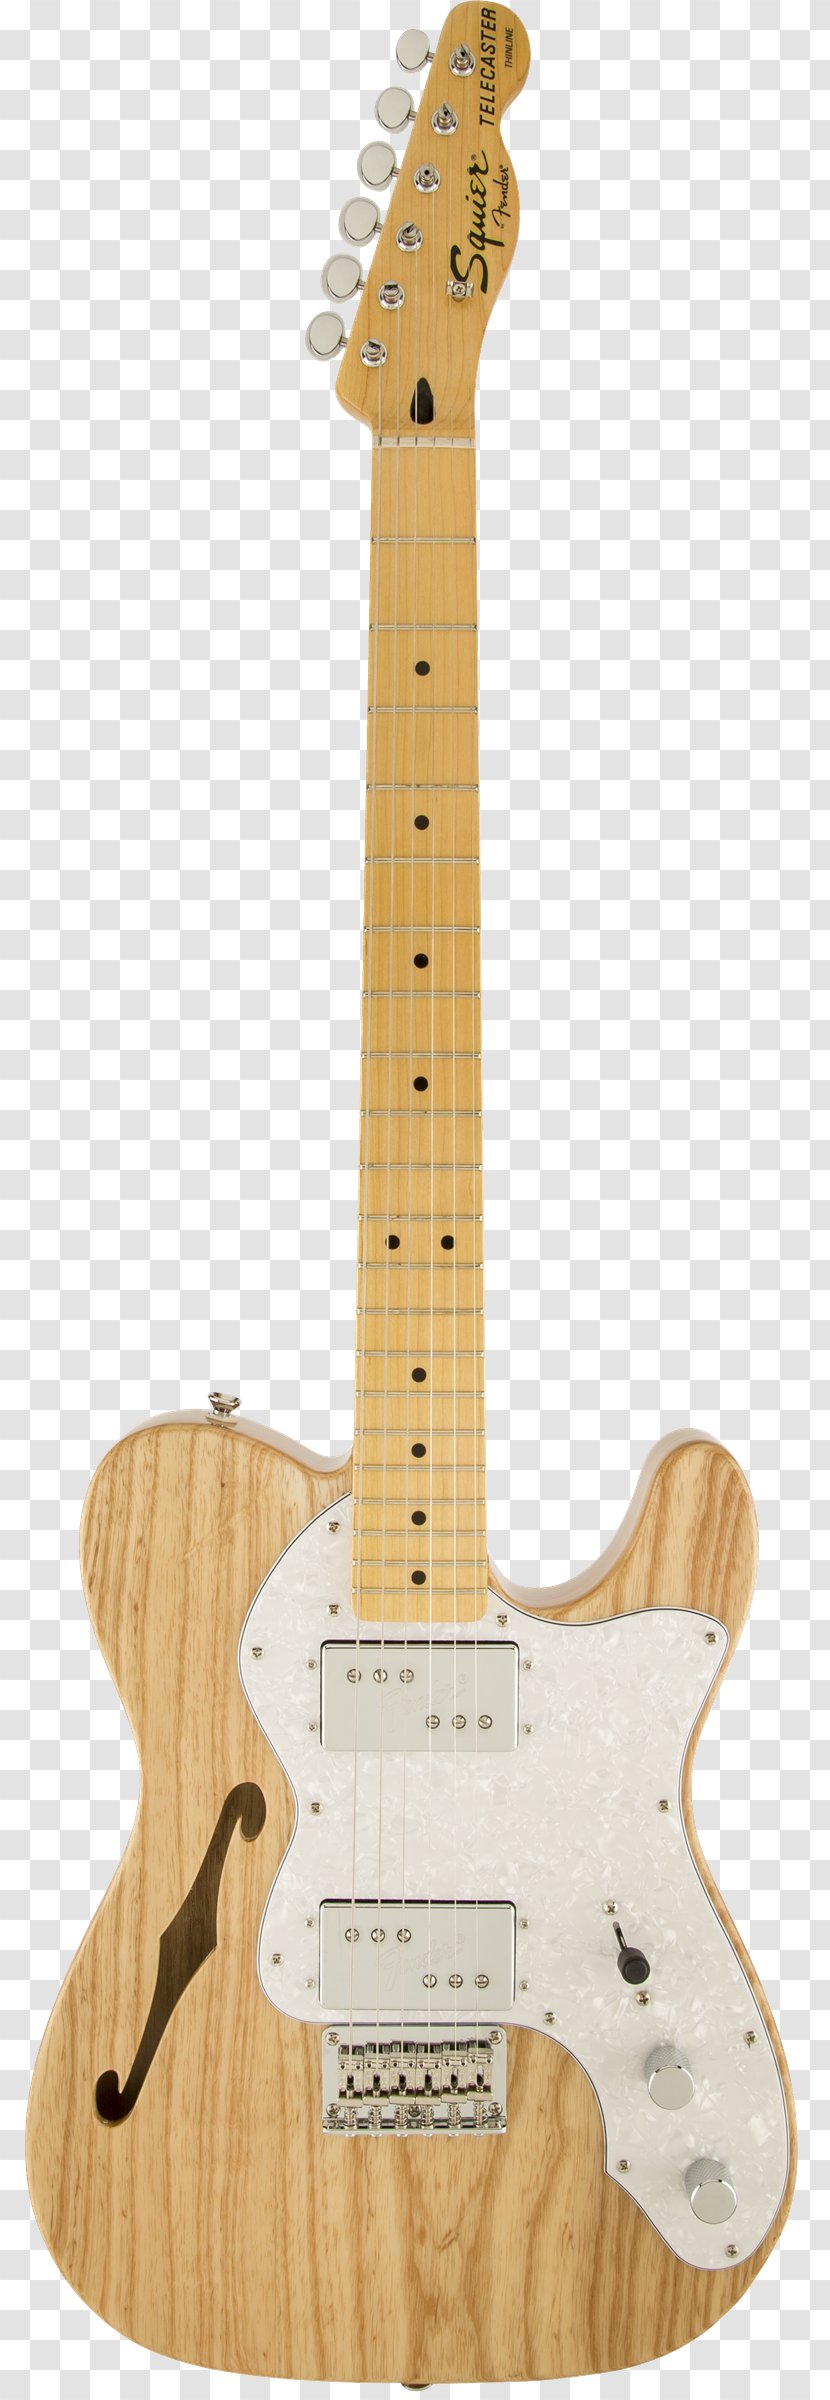 Fender Telecaster Thinline Stratocaster Squier Musical Instruments - Plucked String - Electric Guitar Transparent PNG